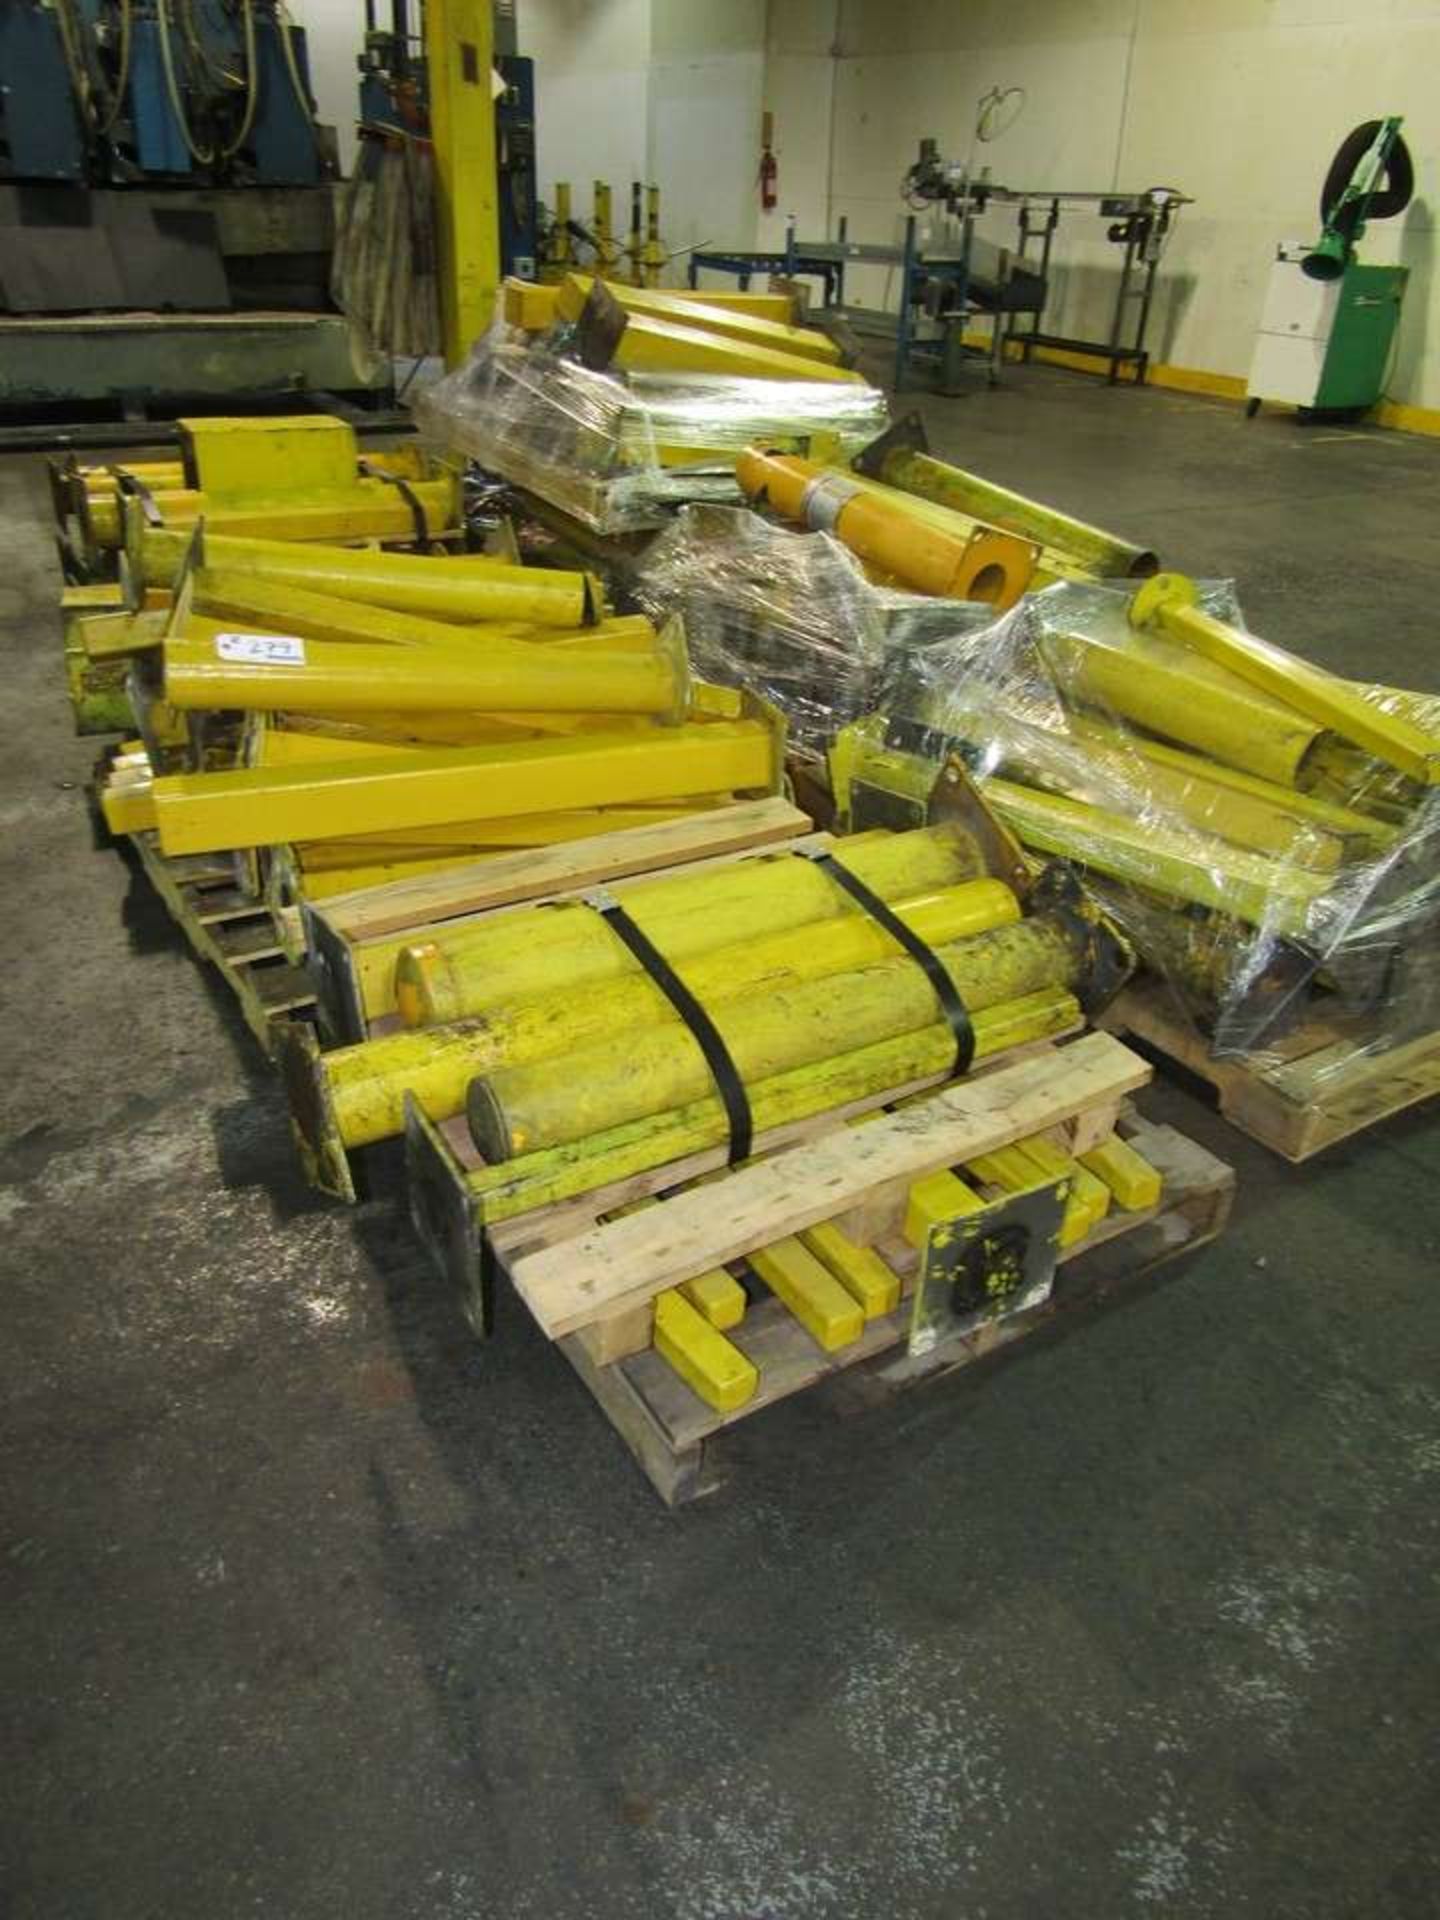 6 Skids of Yellow Metal Safety Barriers